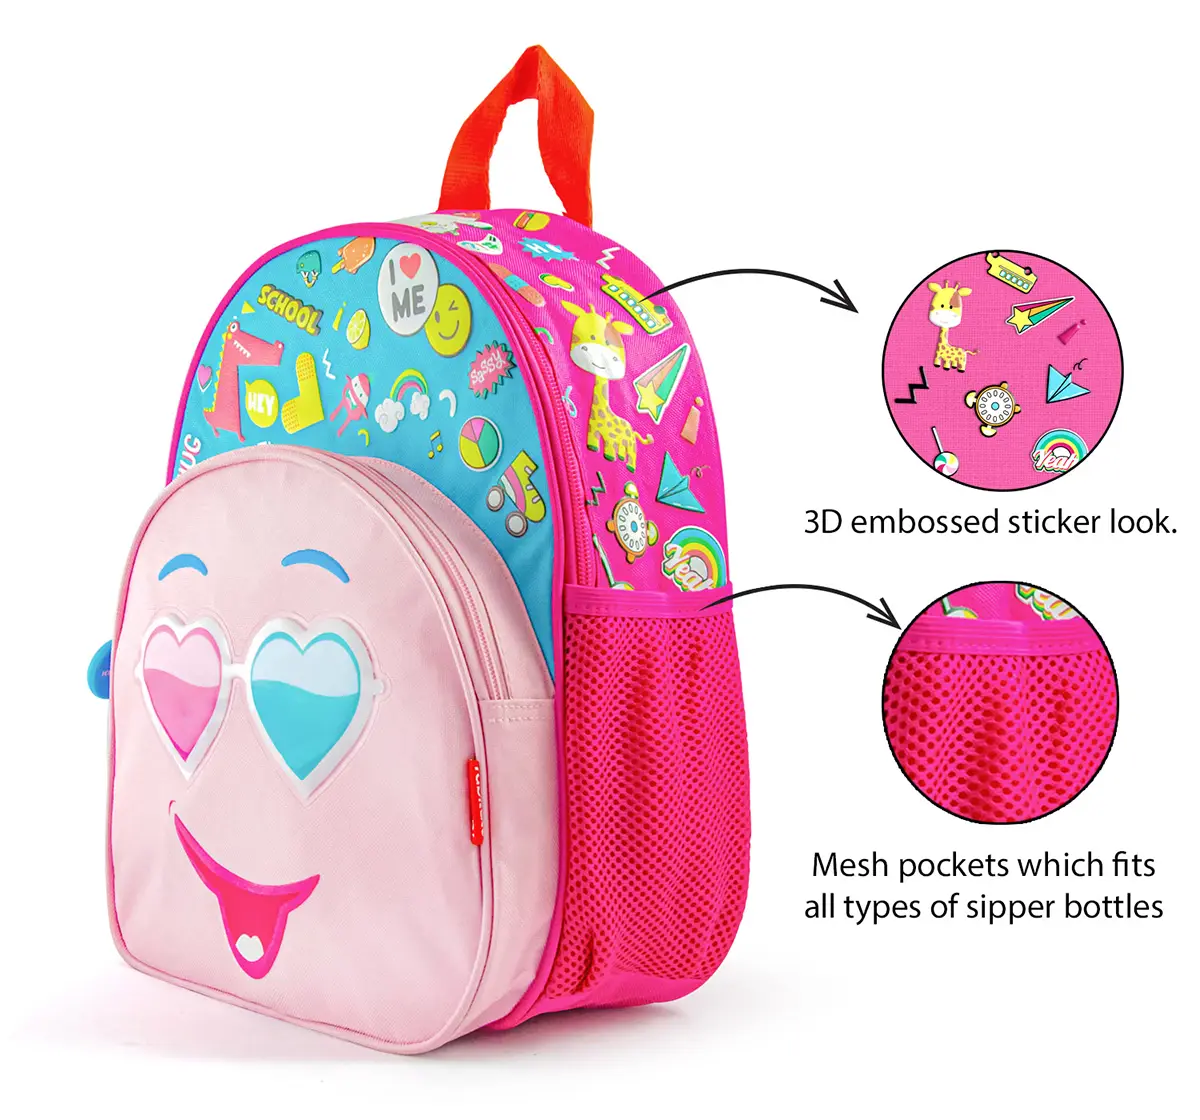 Kids School Bag/Nursery/Picnic/Carry/Travelling Bag Soft Plush Backpack  School Bag for Kids- 2 to 5 Age - Pack of 2 (Doramon & Pikachu) :  Amazon.in: Bags, Wallets and Luggage